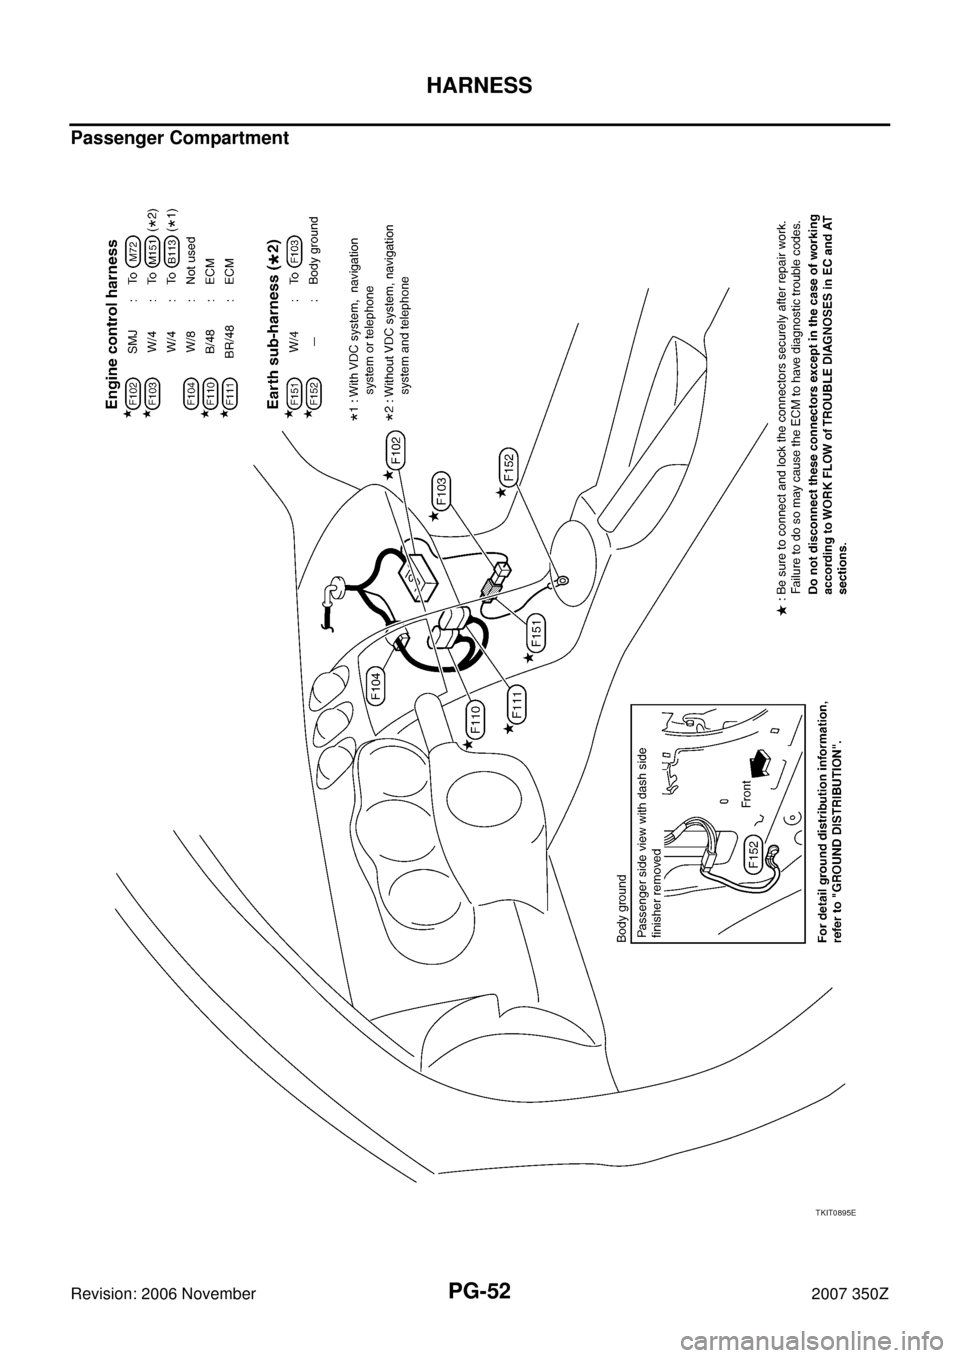 NISSAN 350Z 2007 Z33 Power Supply, Ground And Circuit Repair Manual PG-52
HARNESS
Revision: 2006 November2007 350Z
Passenger Compartment
TKIT0895E 